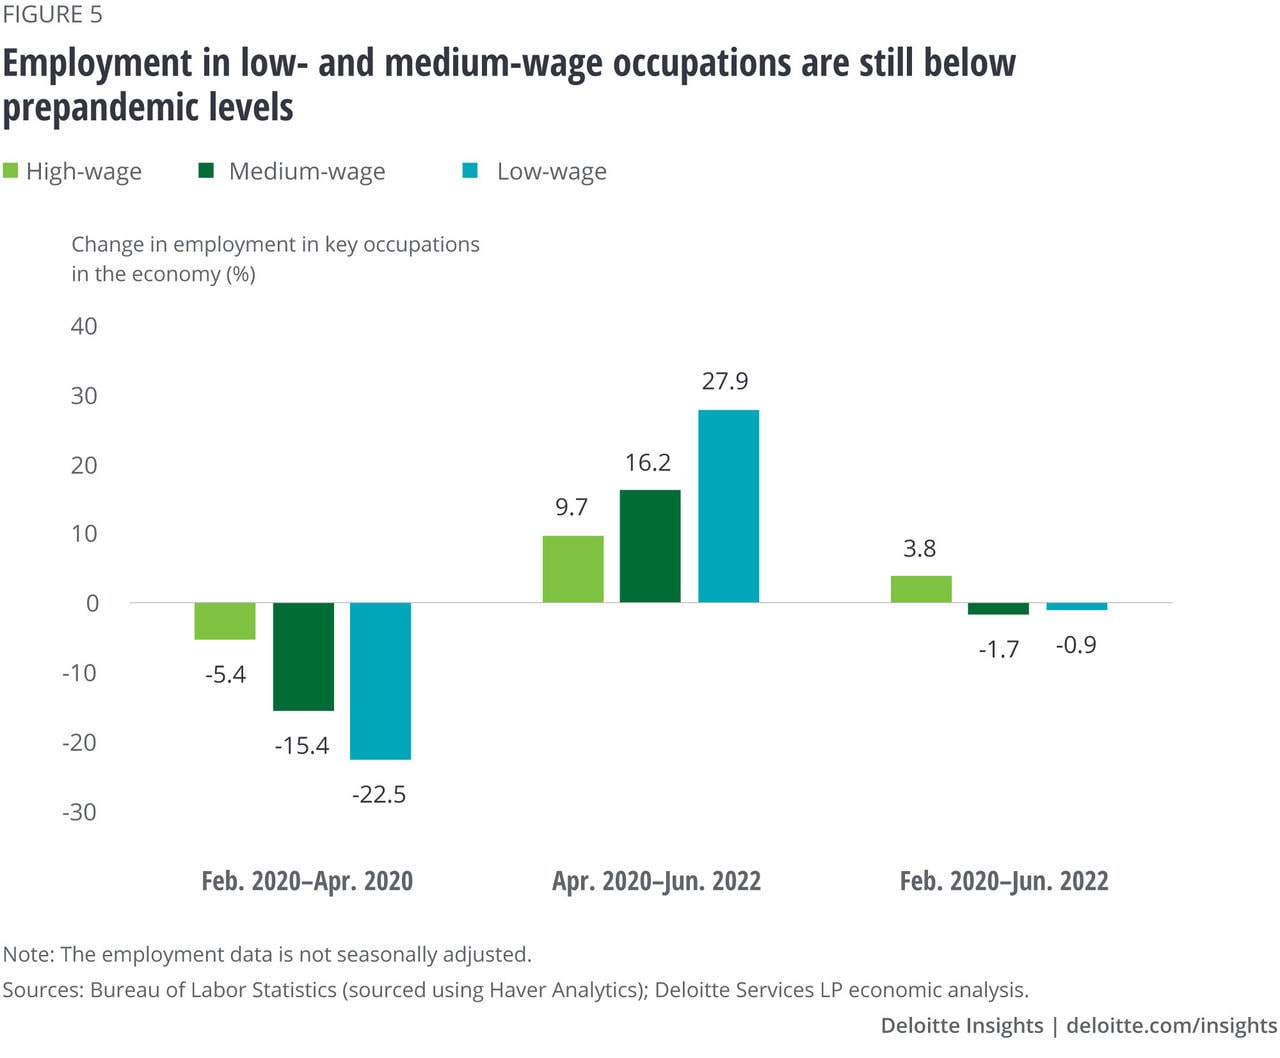 Figure 5. Employment in low- and medium-wage occupations are still below prepandemic levels